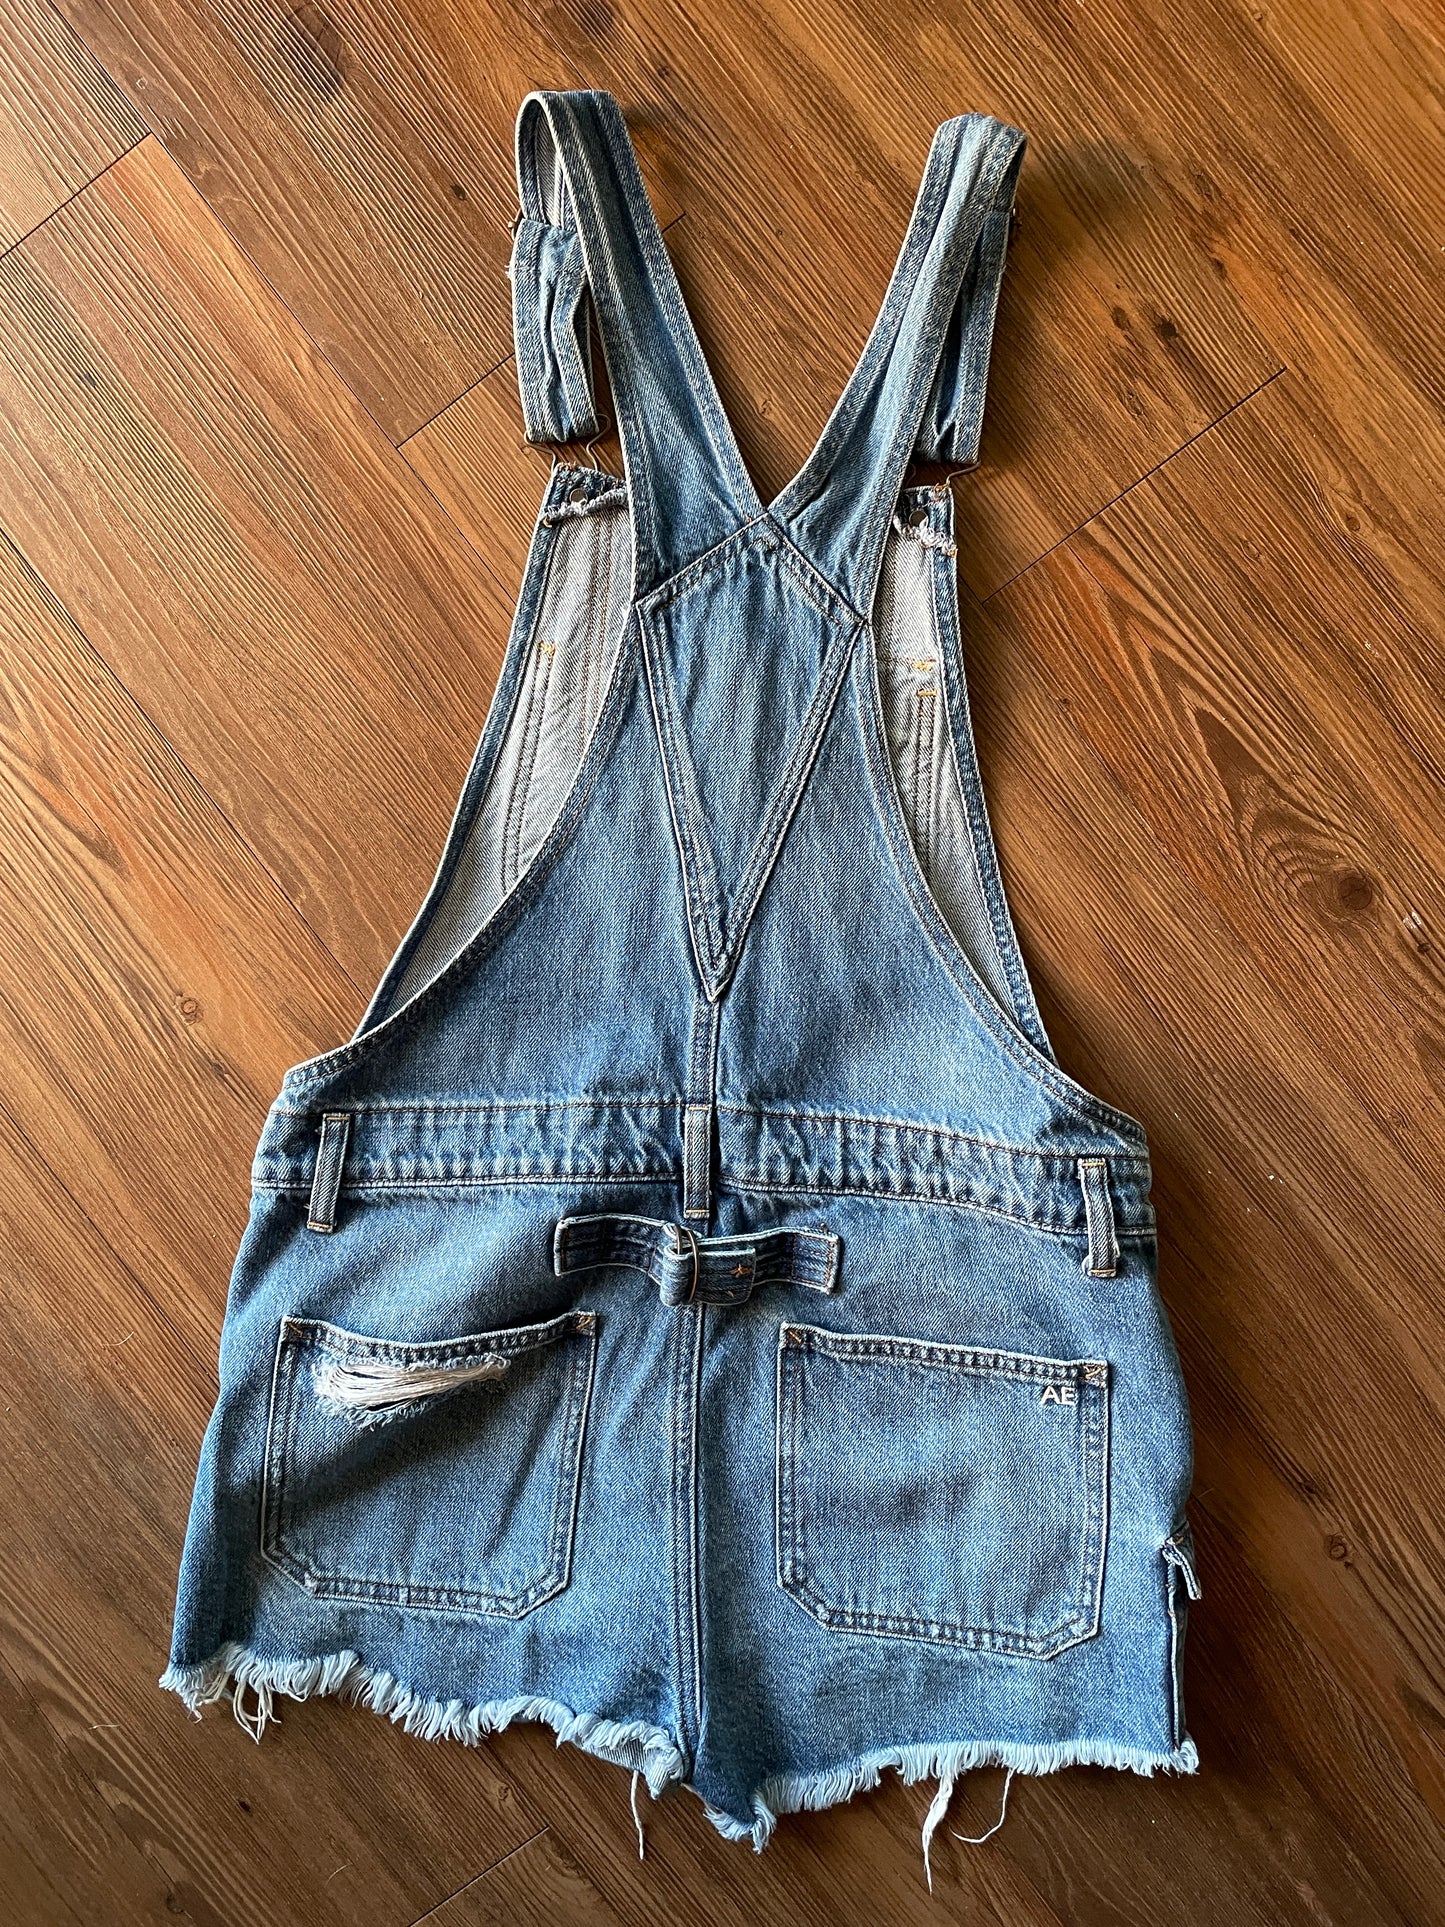 Women’s Small American Eagle Denim Tomgirl Overall Shorts